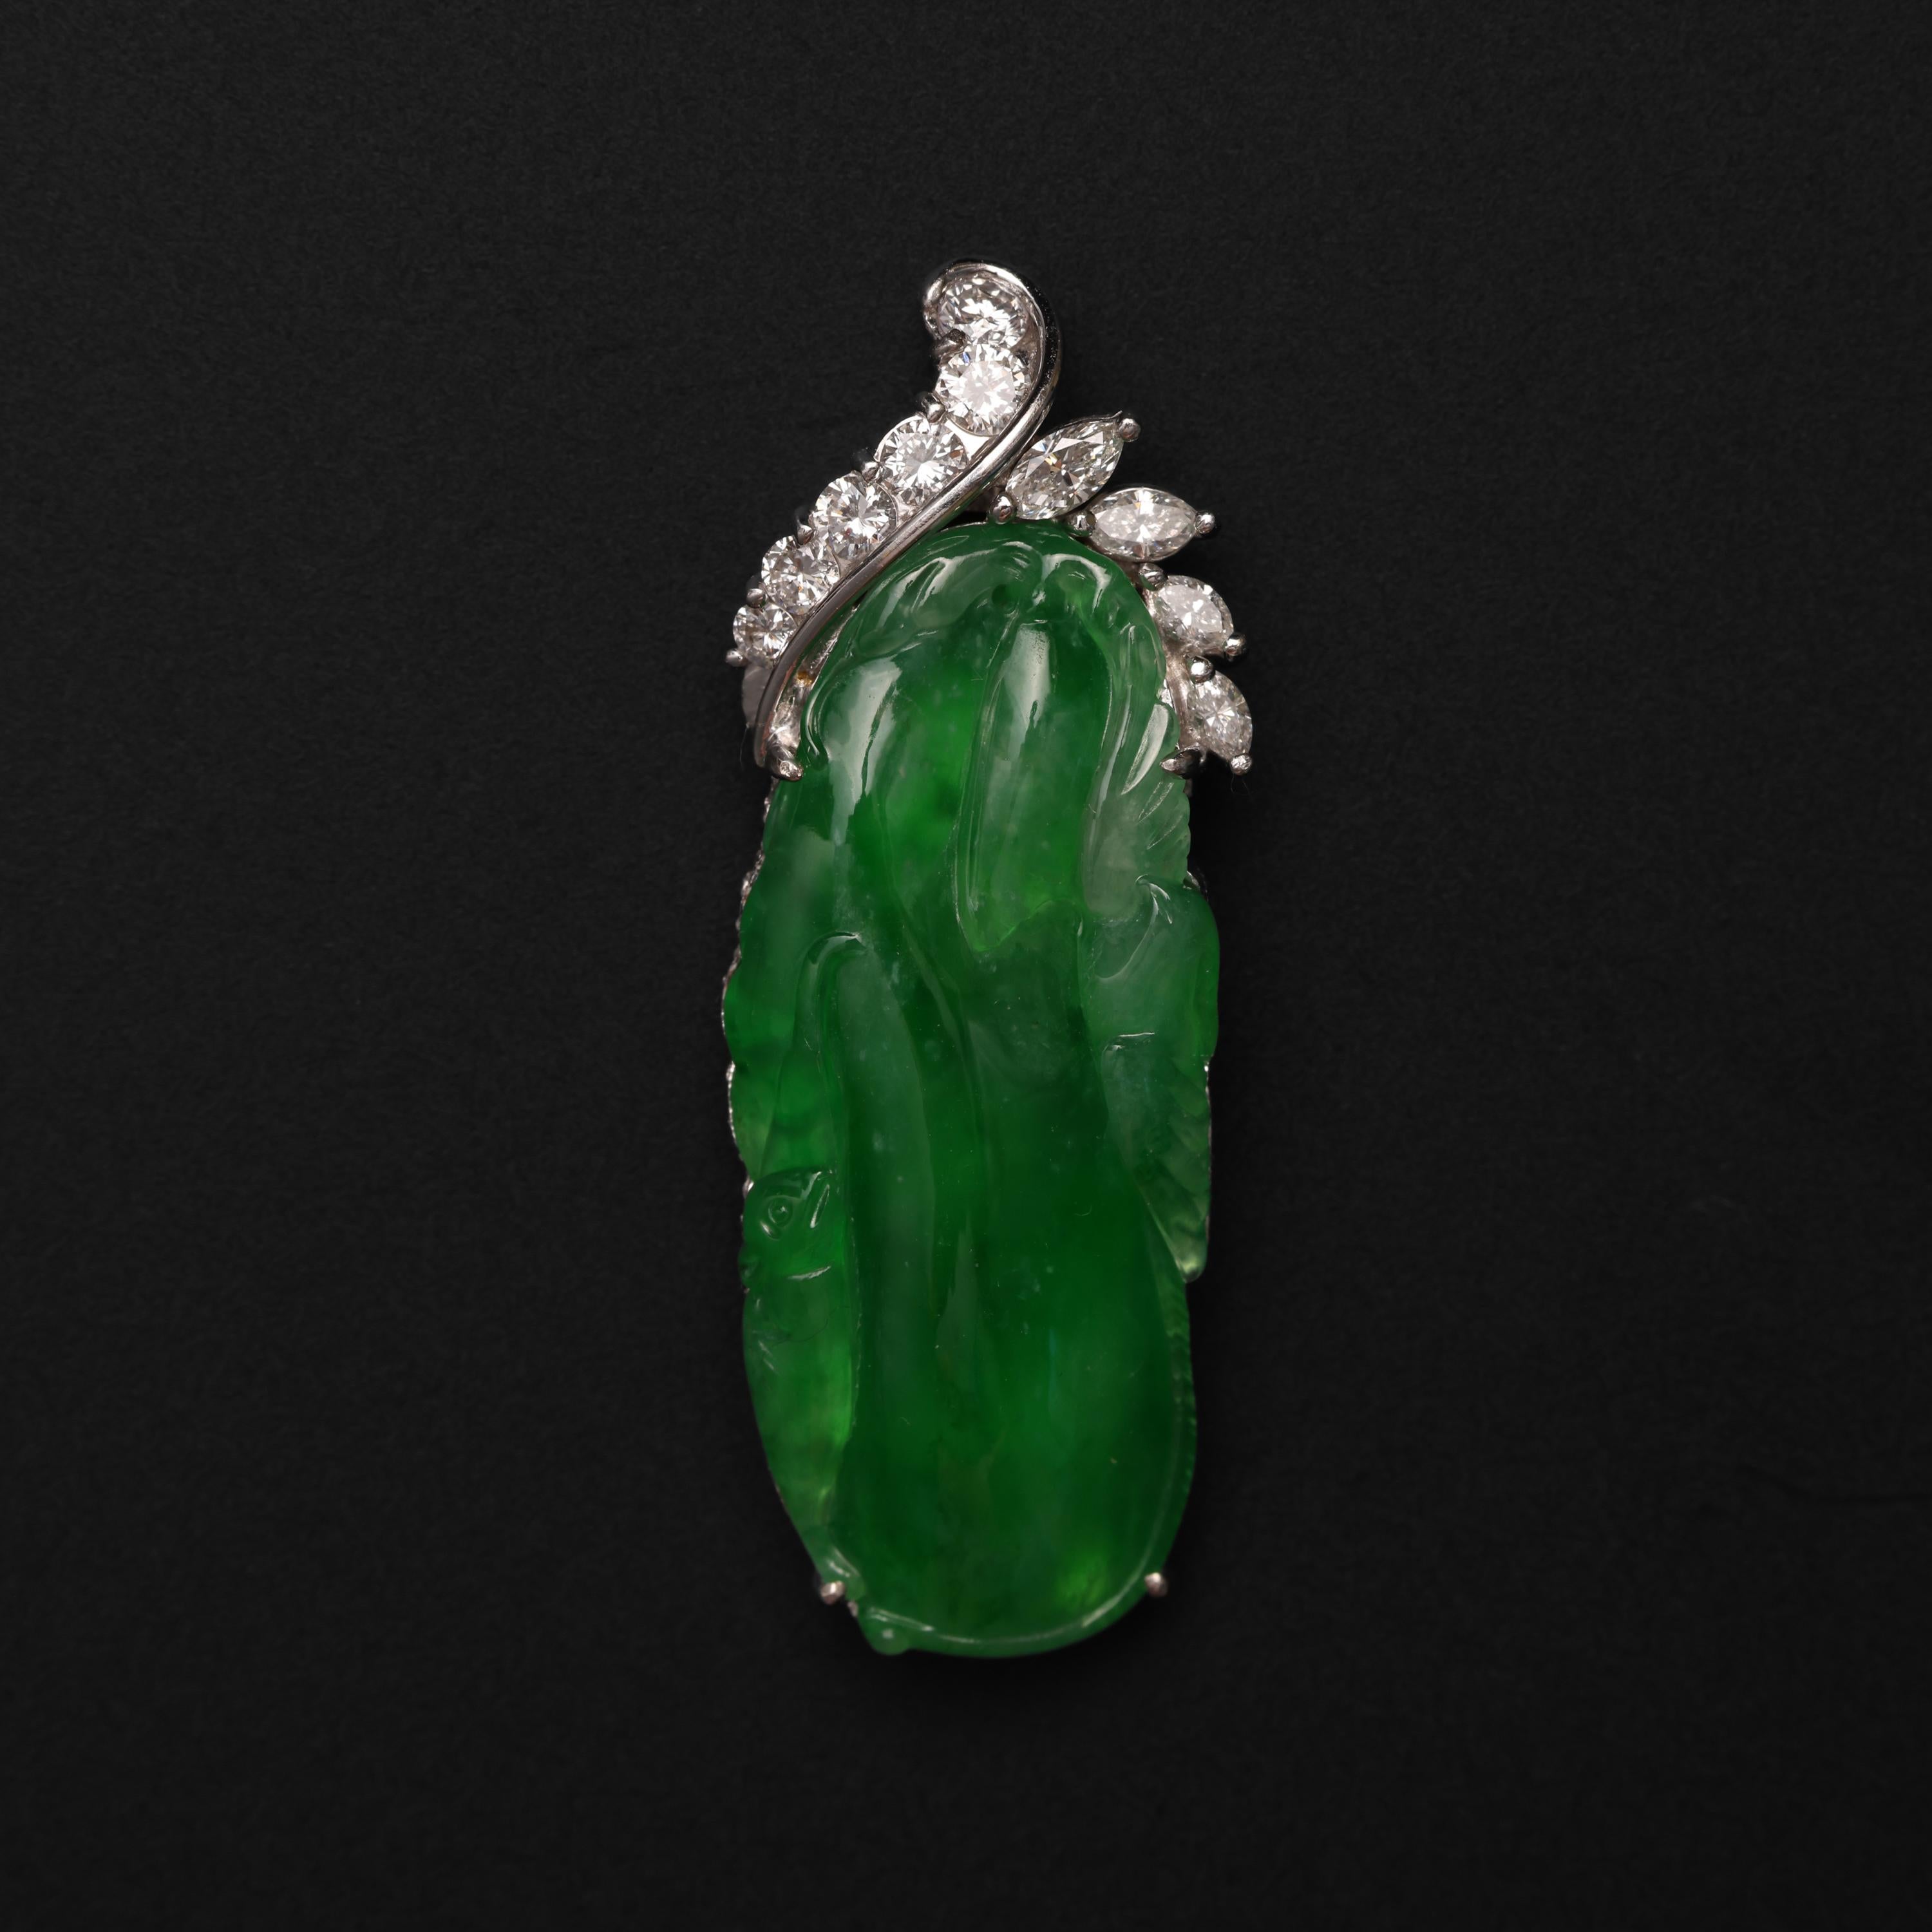 This imperial jade pendant features a glassy, highly translucent GIA-certified natural and untreated Burmese jadeite jade carving depicting birds among leaves. The emerald-green jade looks succulent, as if filled with liquid and light. 

This